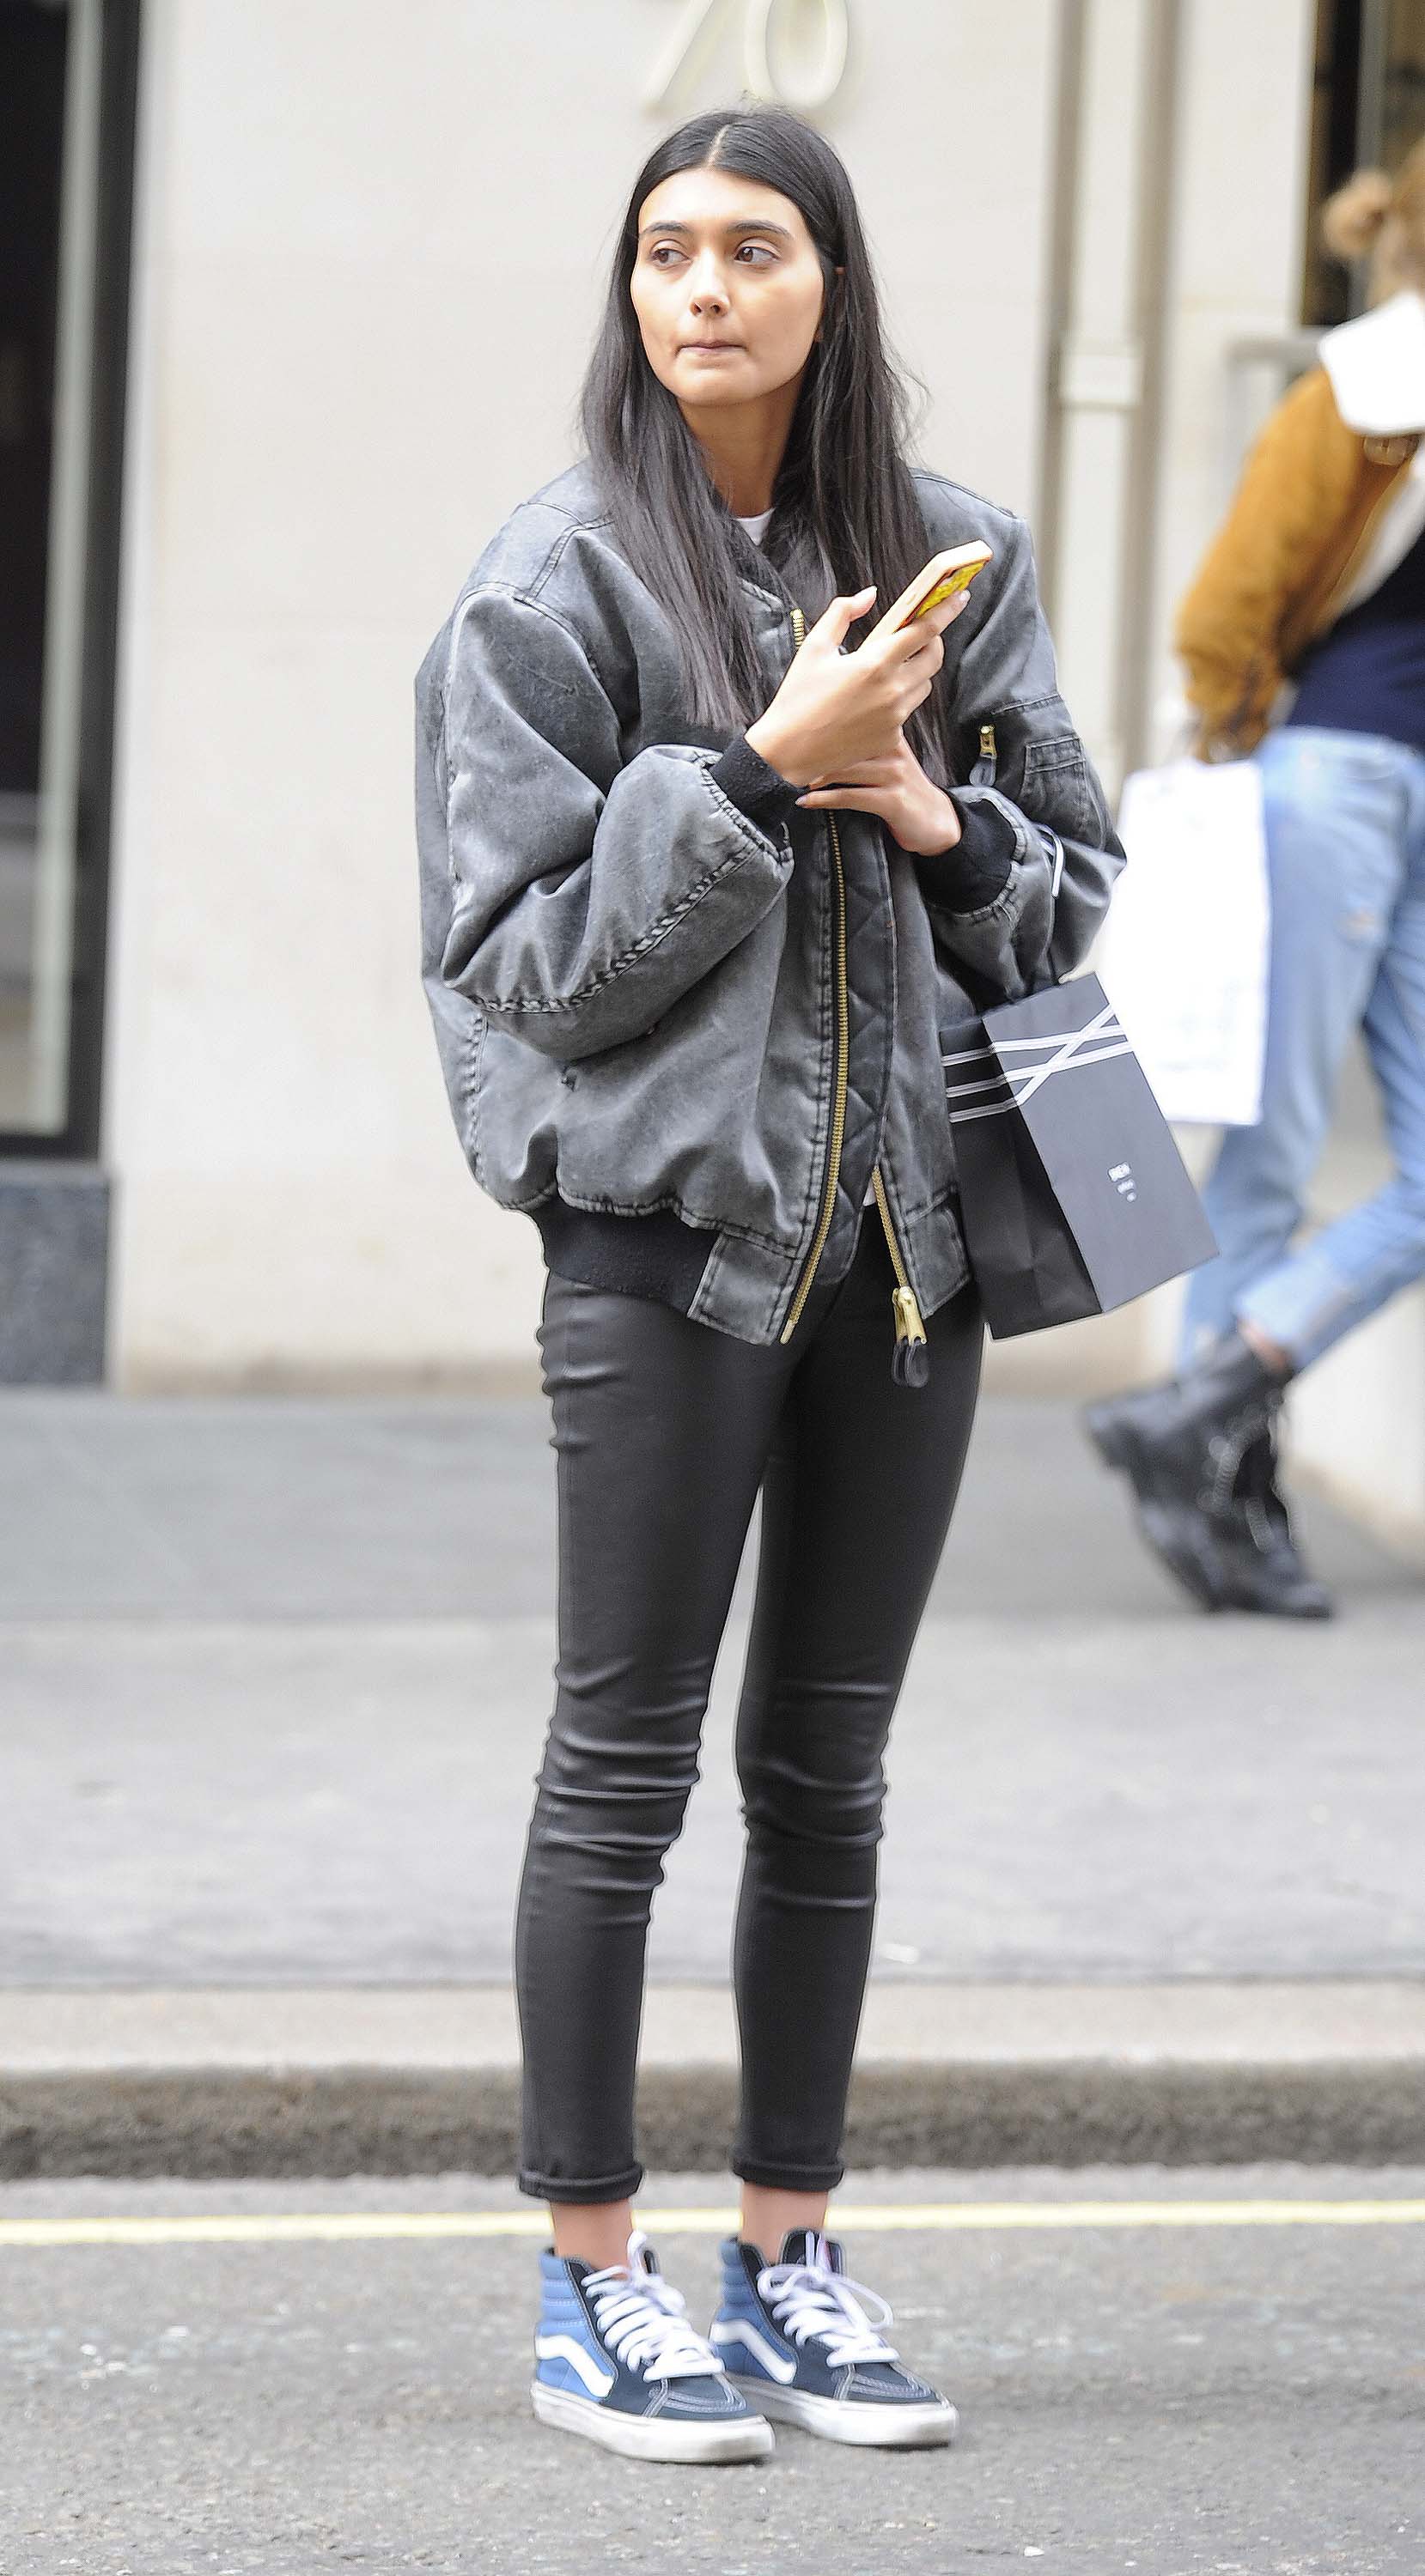 Neelam Gill out and about in London